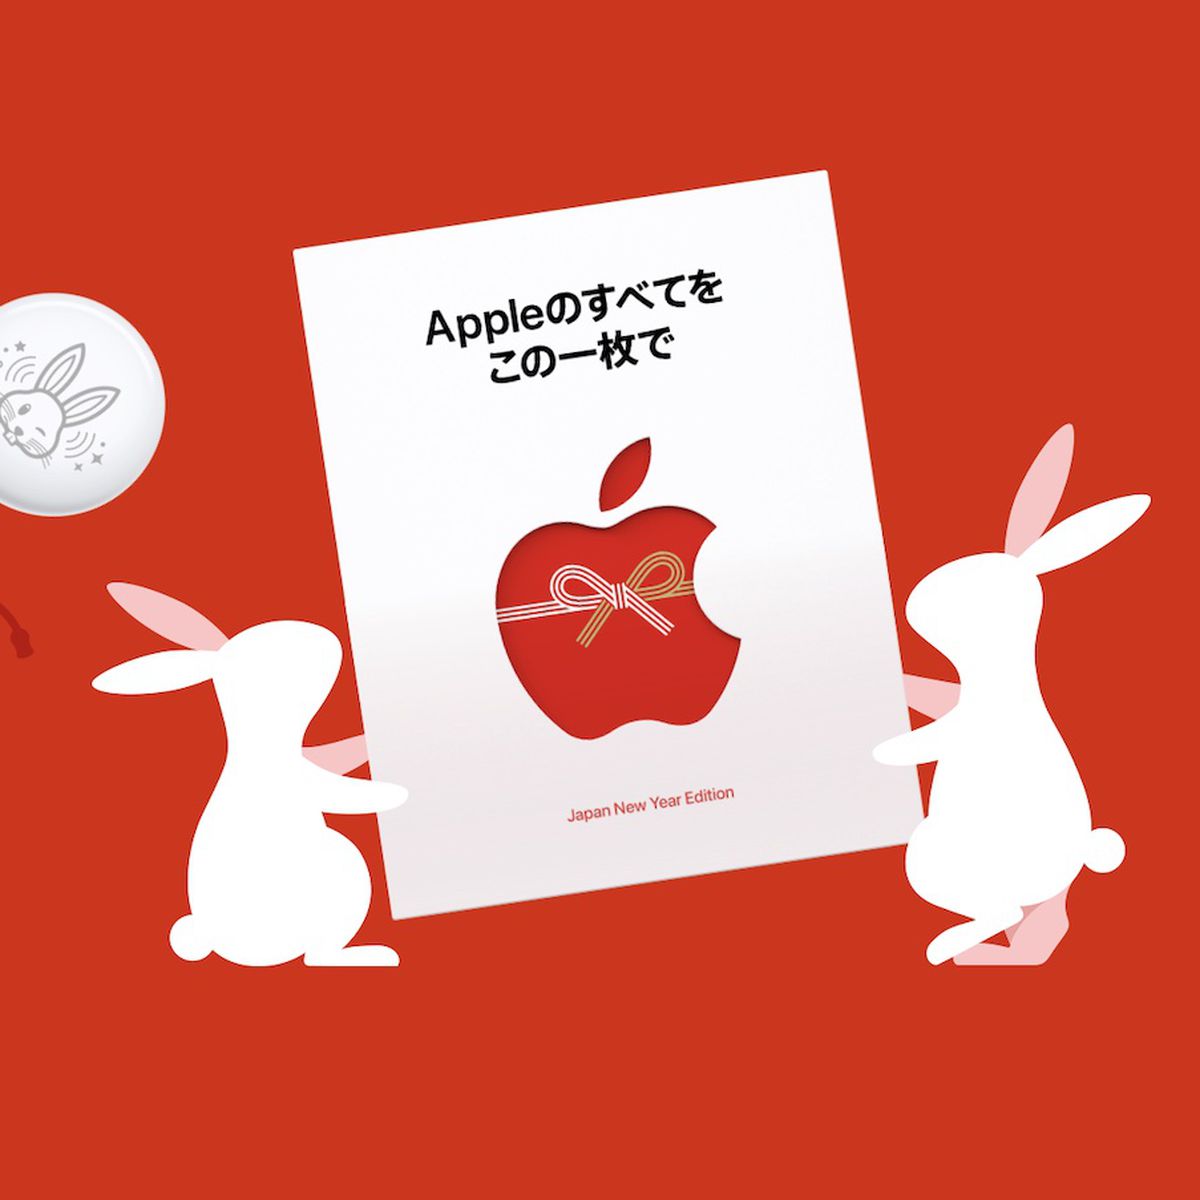 Apple Announces Japanese New Year Promotion With Limited-Edition 